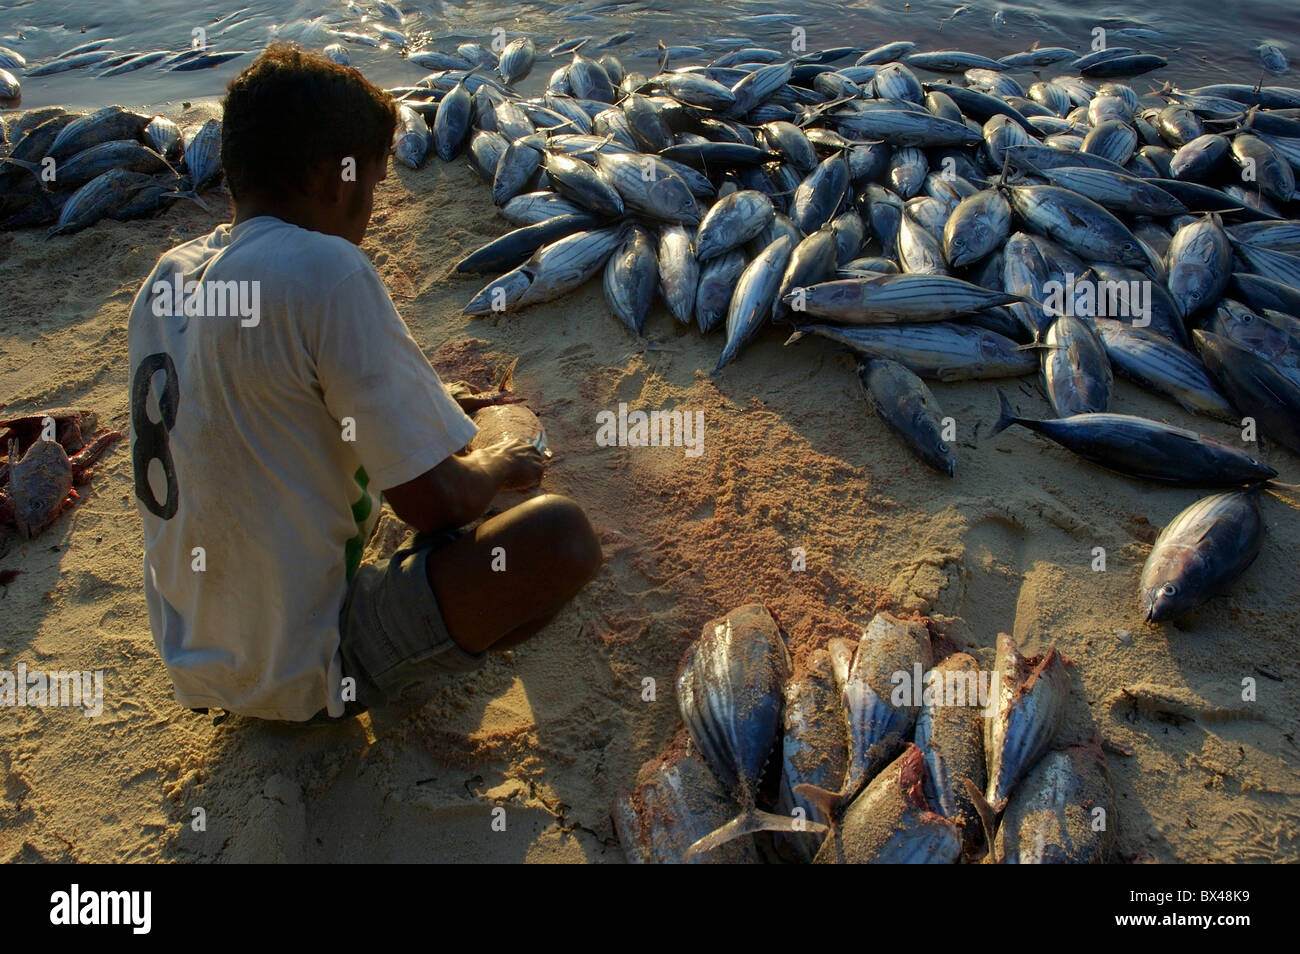 A Fisherman Cutting Tunas Head On The Beach At Sunset in the Maldives Stock Photo